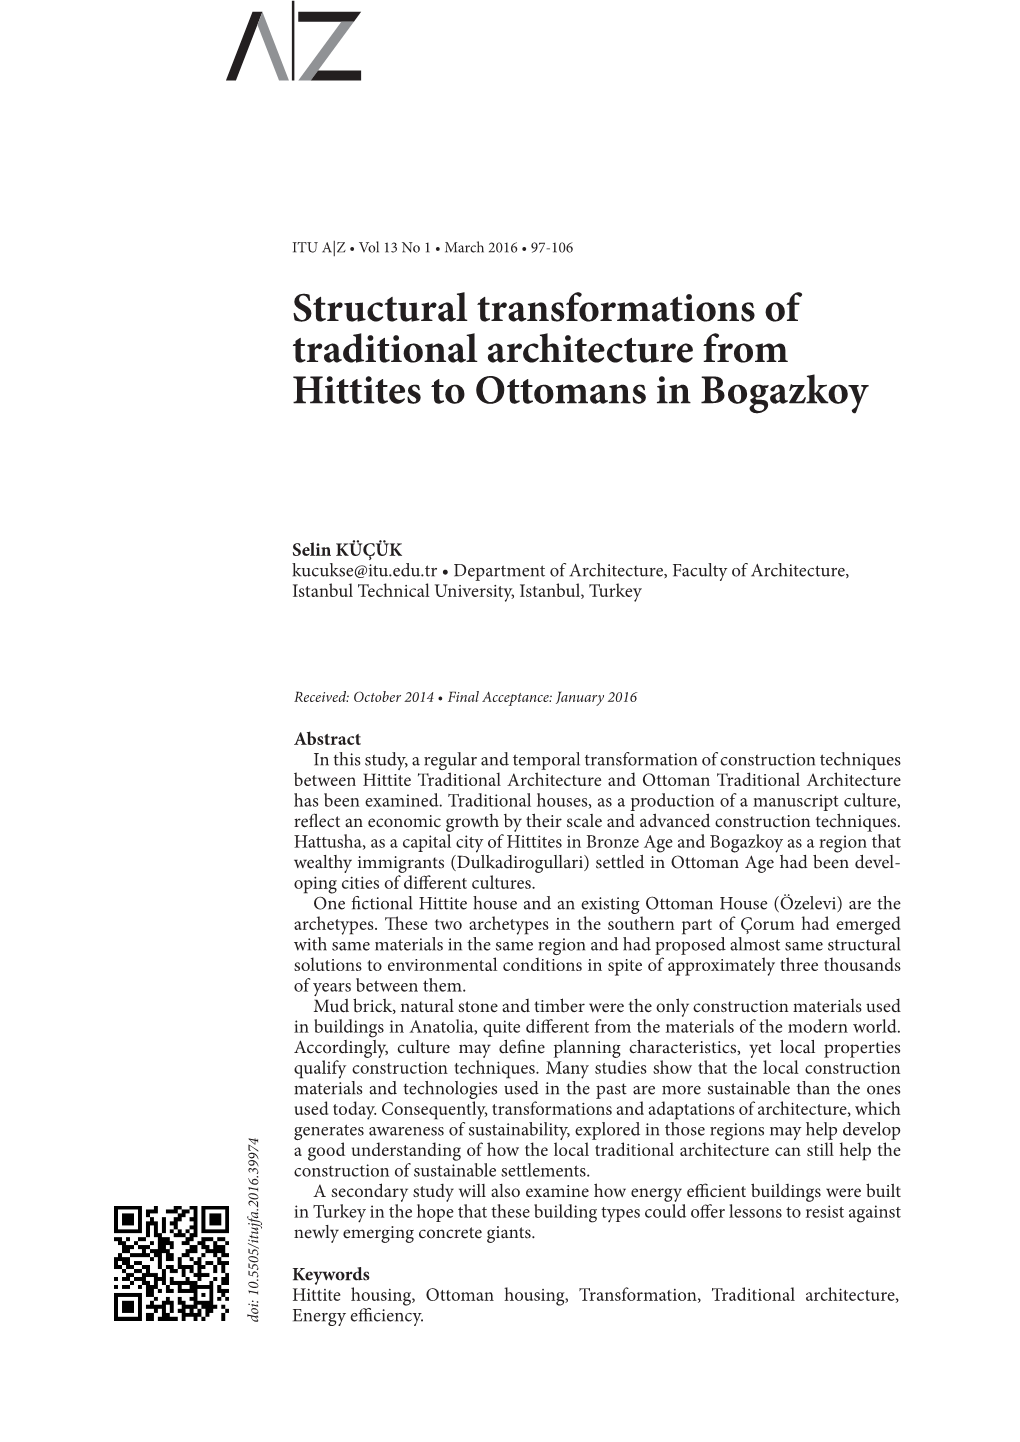 Structural Transformations of Traditional Architecture from Hittites to Ottomans in Bogazkoy